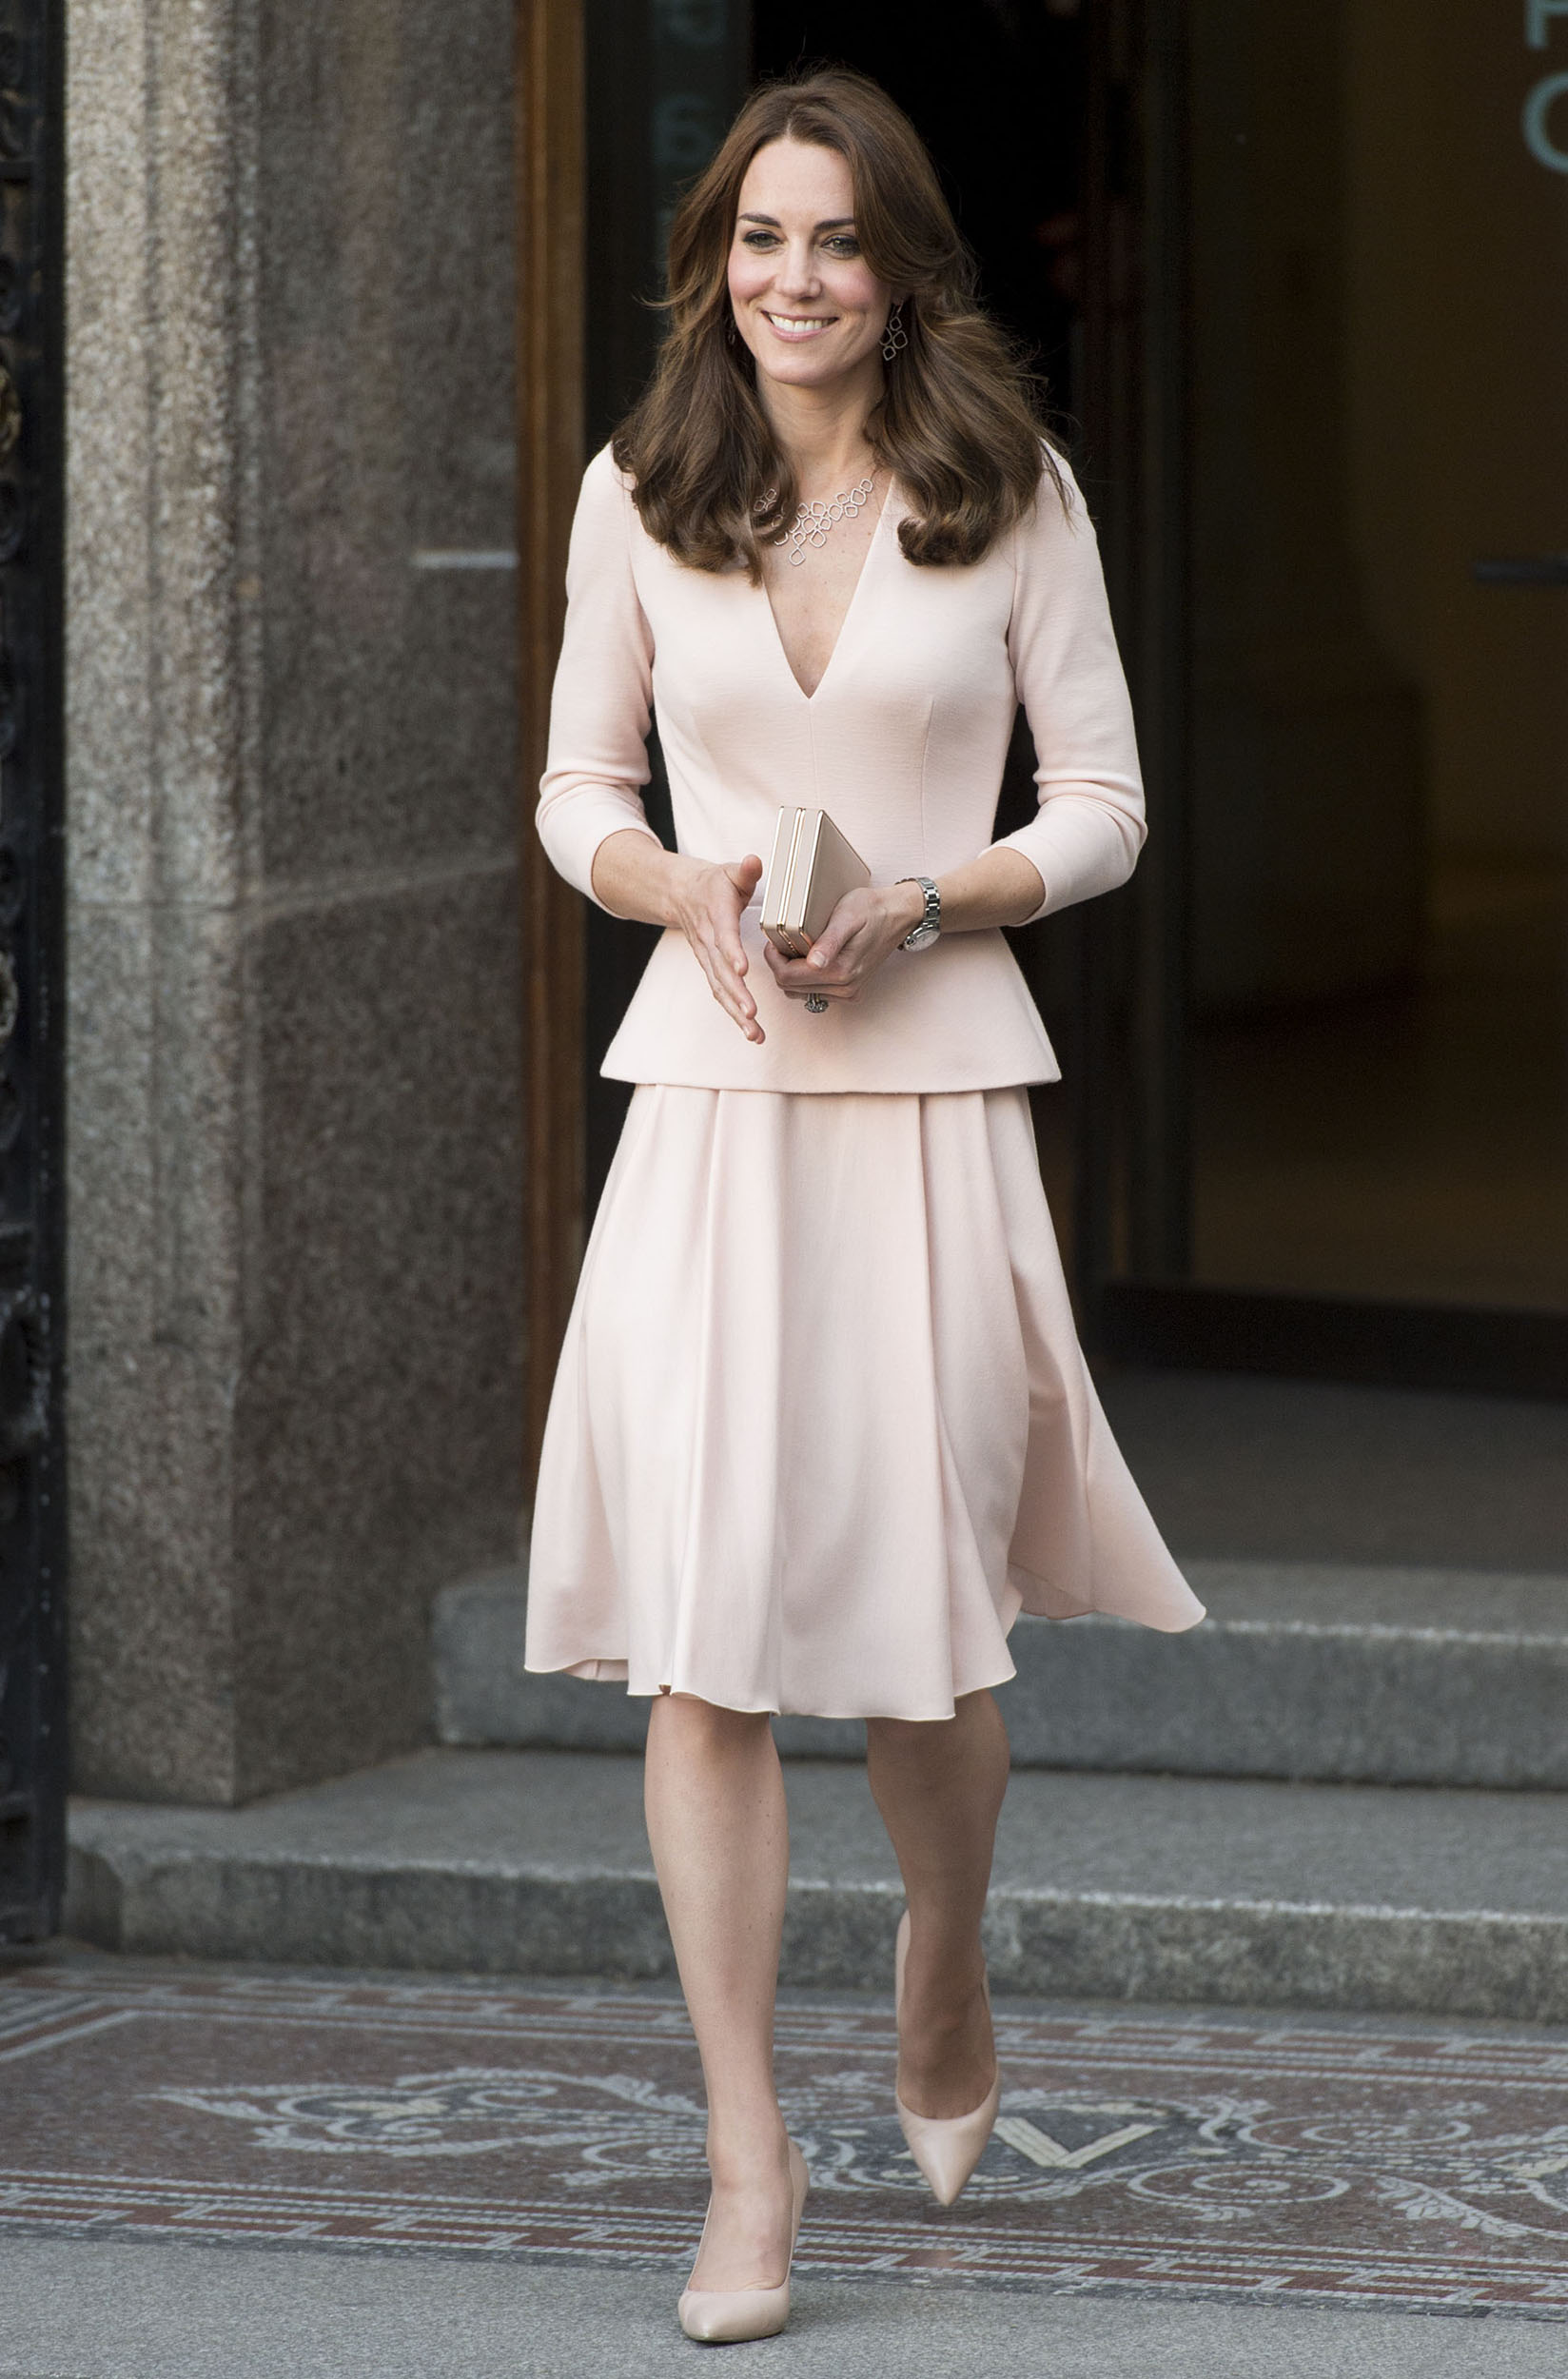 Catherine, Duchess of Cambridge visits the "Vogue 100: A Century Of Style" exhibition at National Portrait Gallery in London on May 4, 2016.